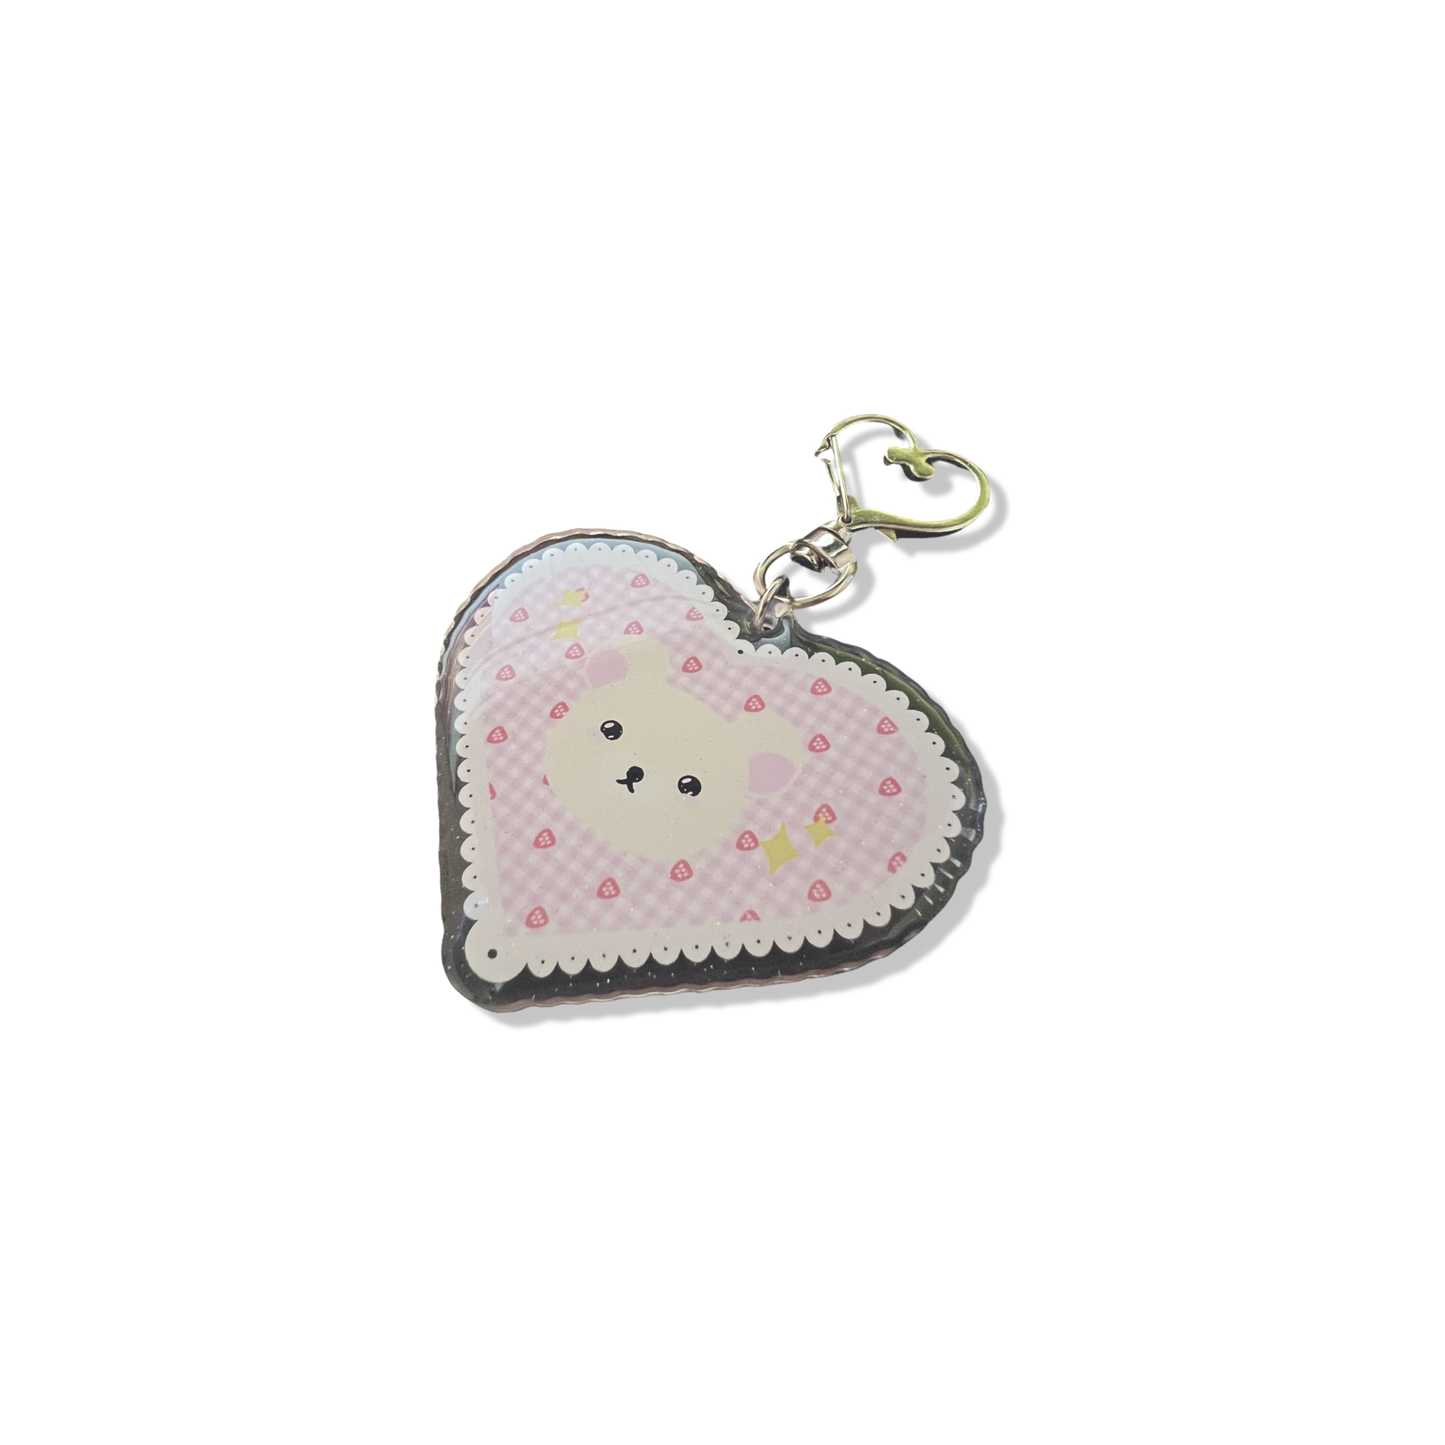 White bear acrylic keychain with micro-glitter finish and silver heart hook.